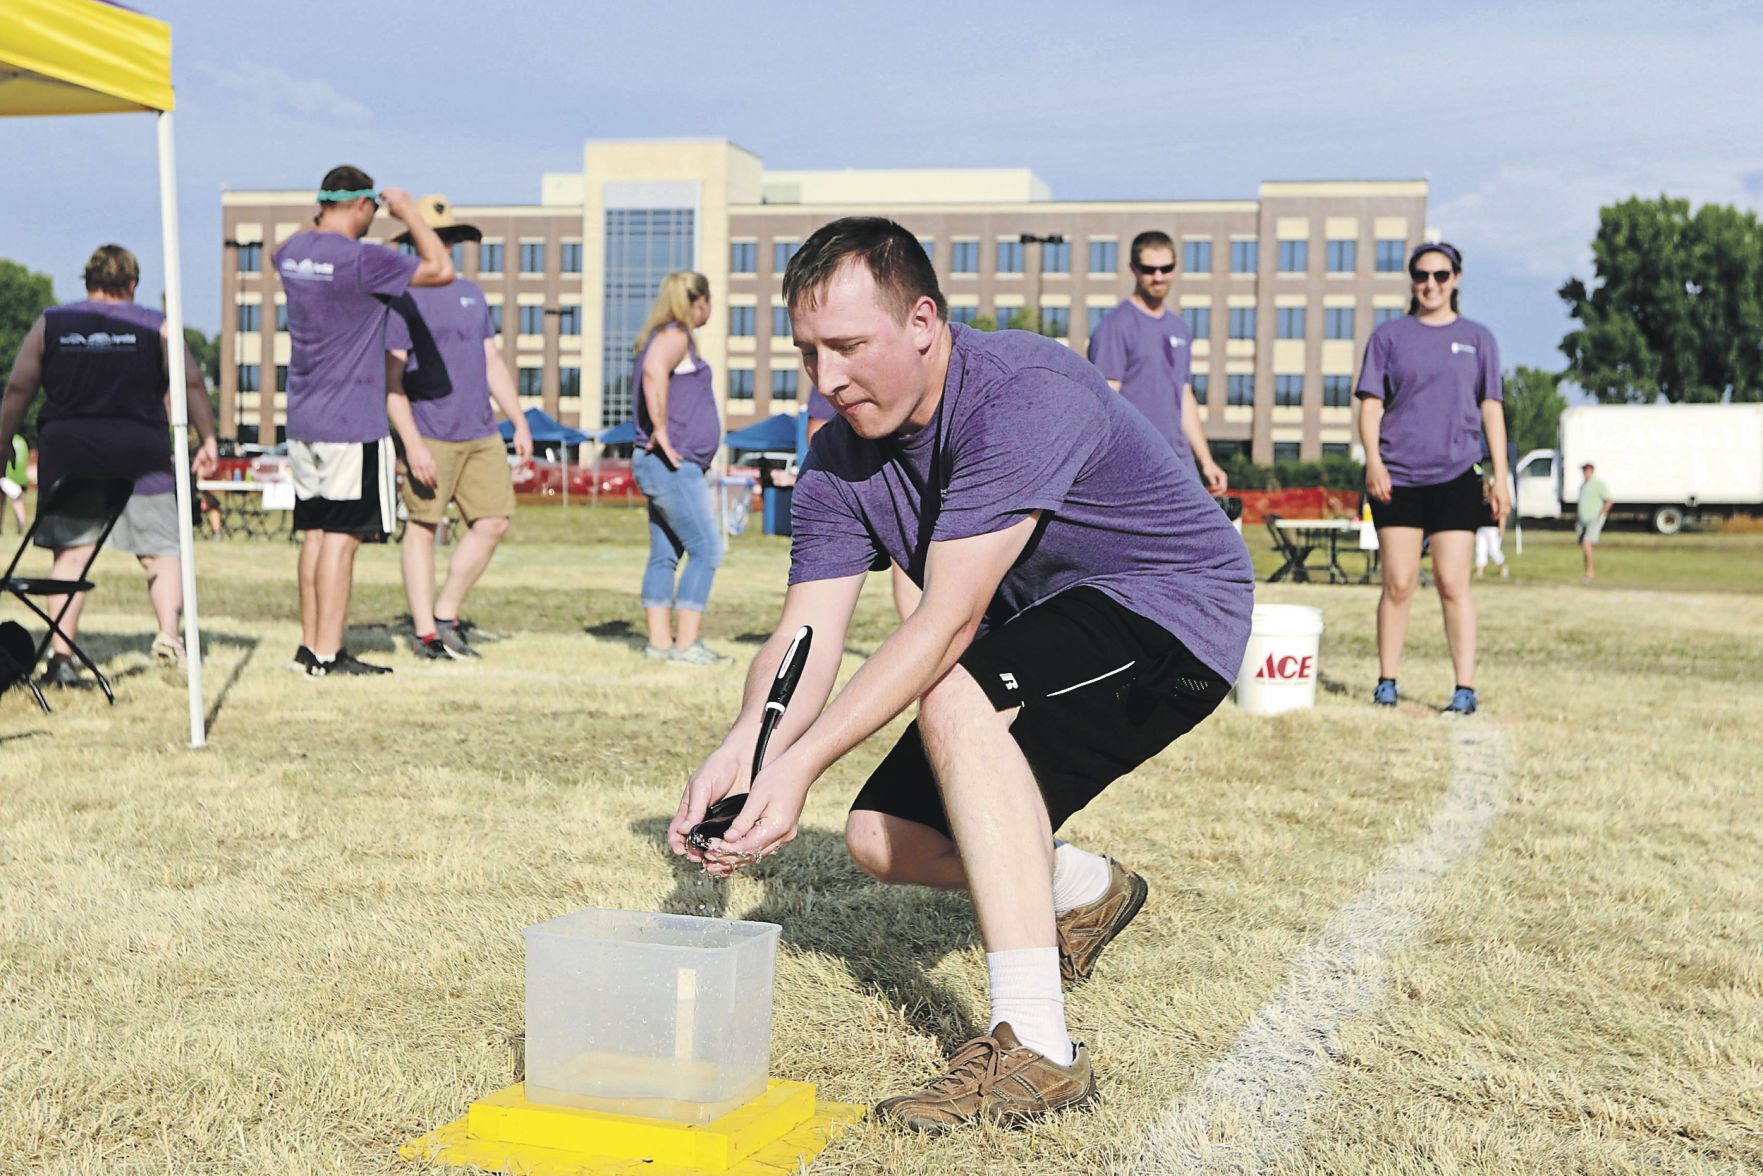 Teams participate in a water game at the Area Residential Care Corporate and Community game night at the Port of Dubuque on Friday, June 11, 2021.    PHOTO CREDIT: Katie Goodale